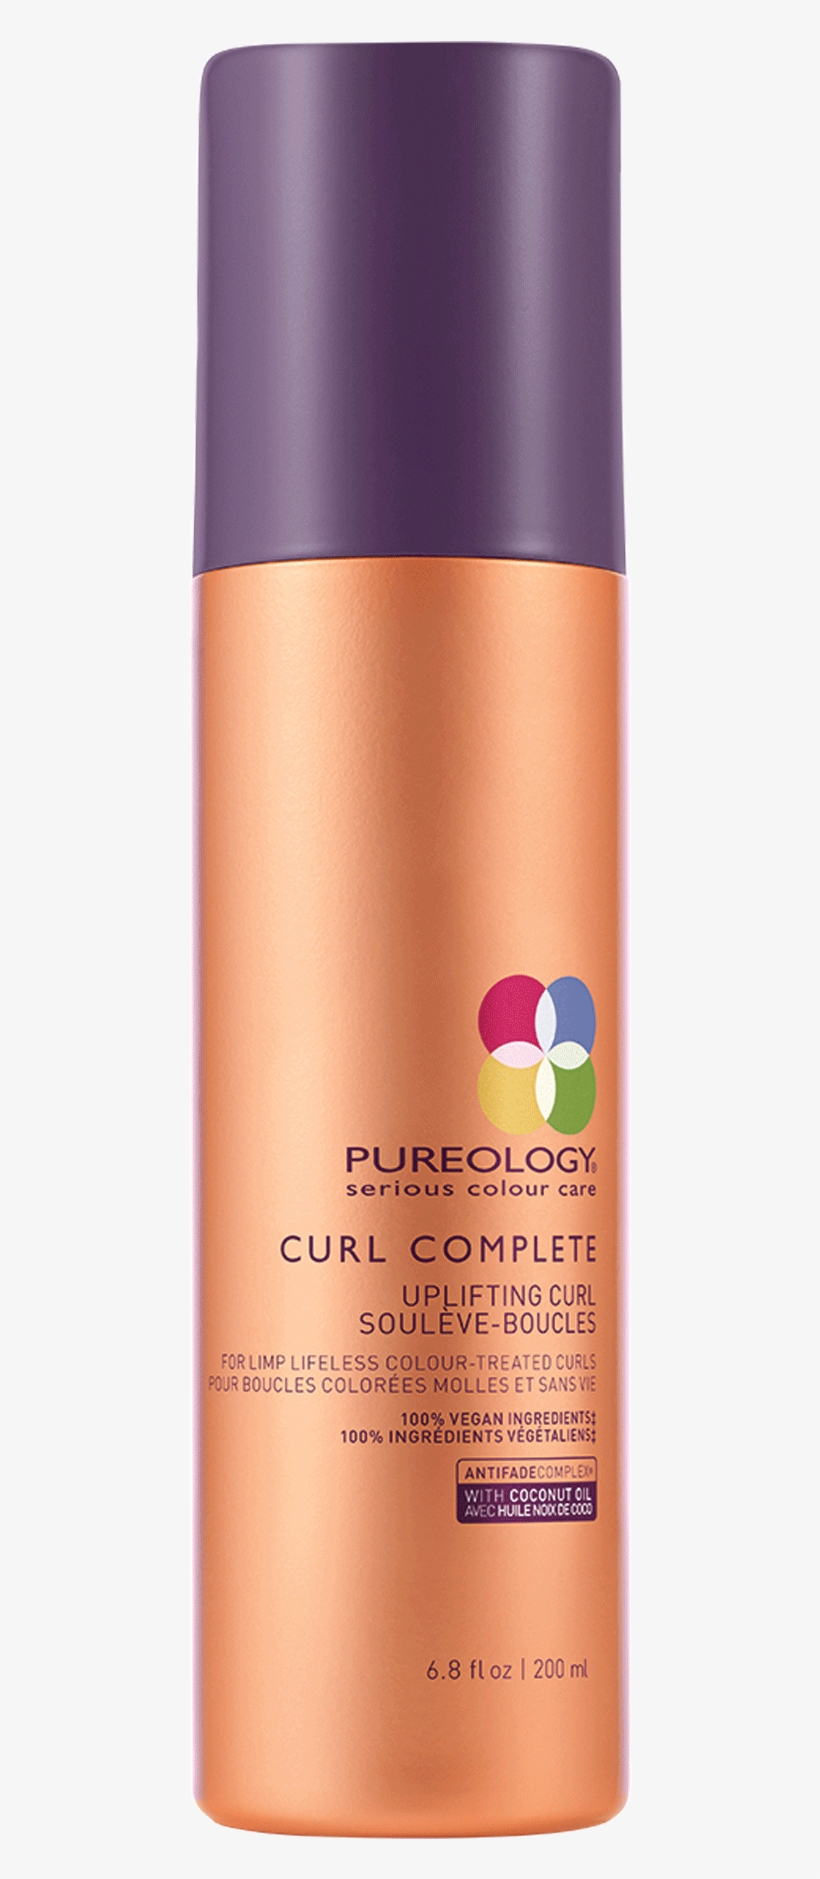 Curl Complete Uplifting Curl Spray Hair Gel - Pureology Curl Complete, transparent png #4113967